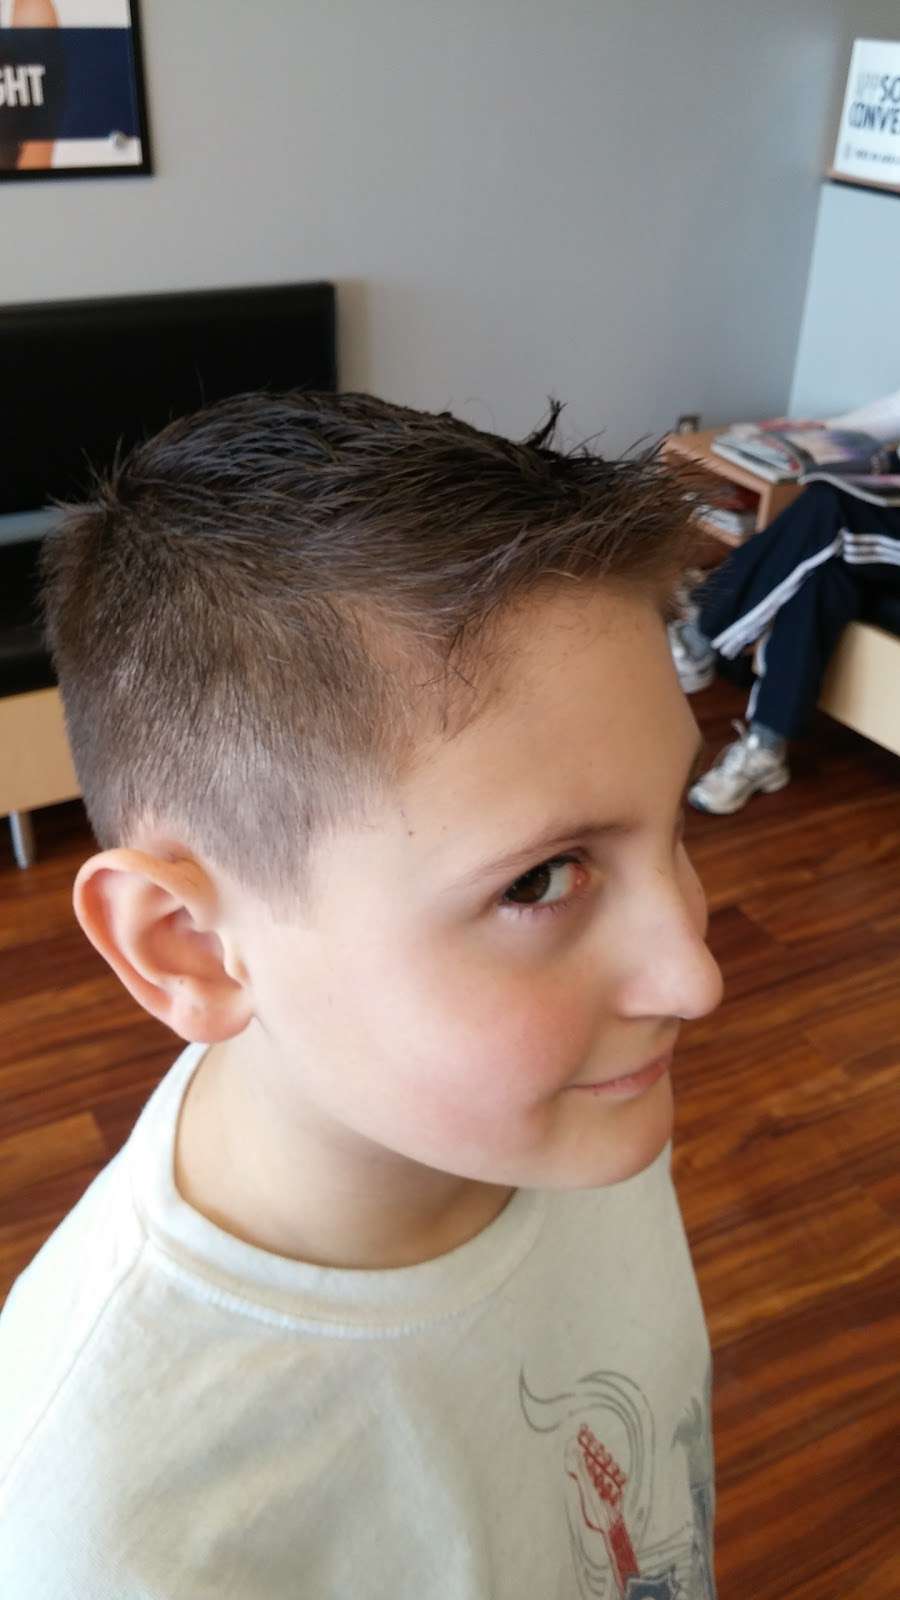 Supercuts | 1640 Wesel Blvd c, Hagerstown, MD 21740 | Phone: (301) 393-5740